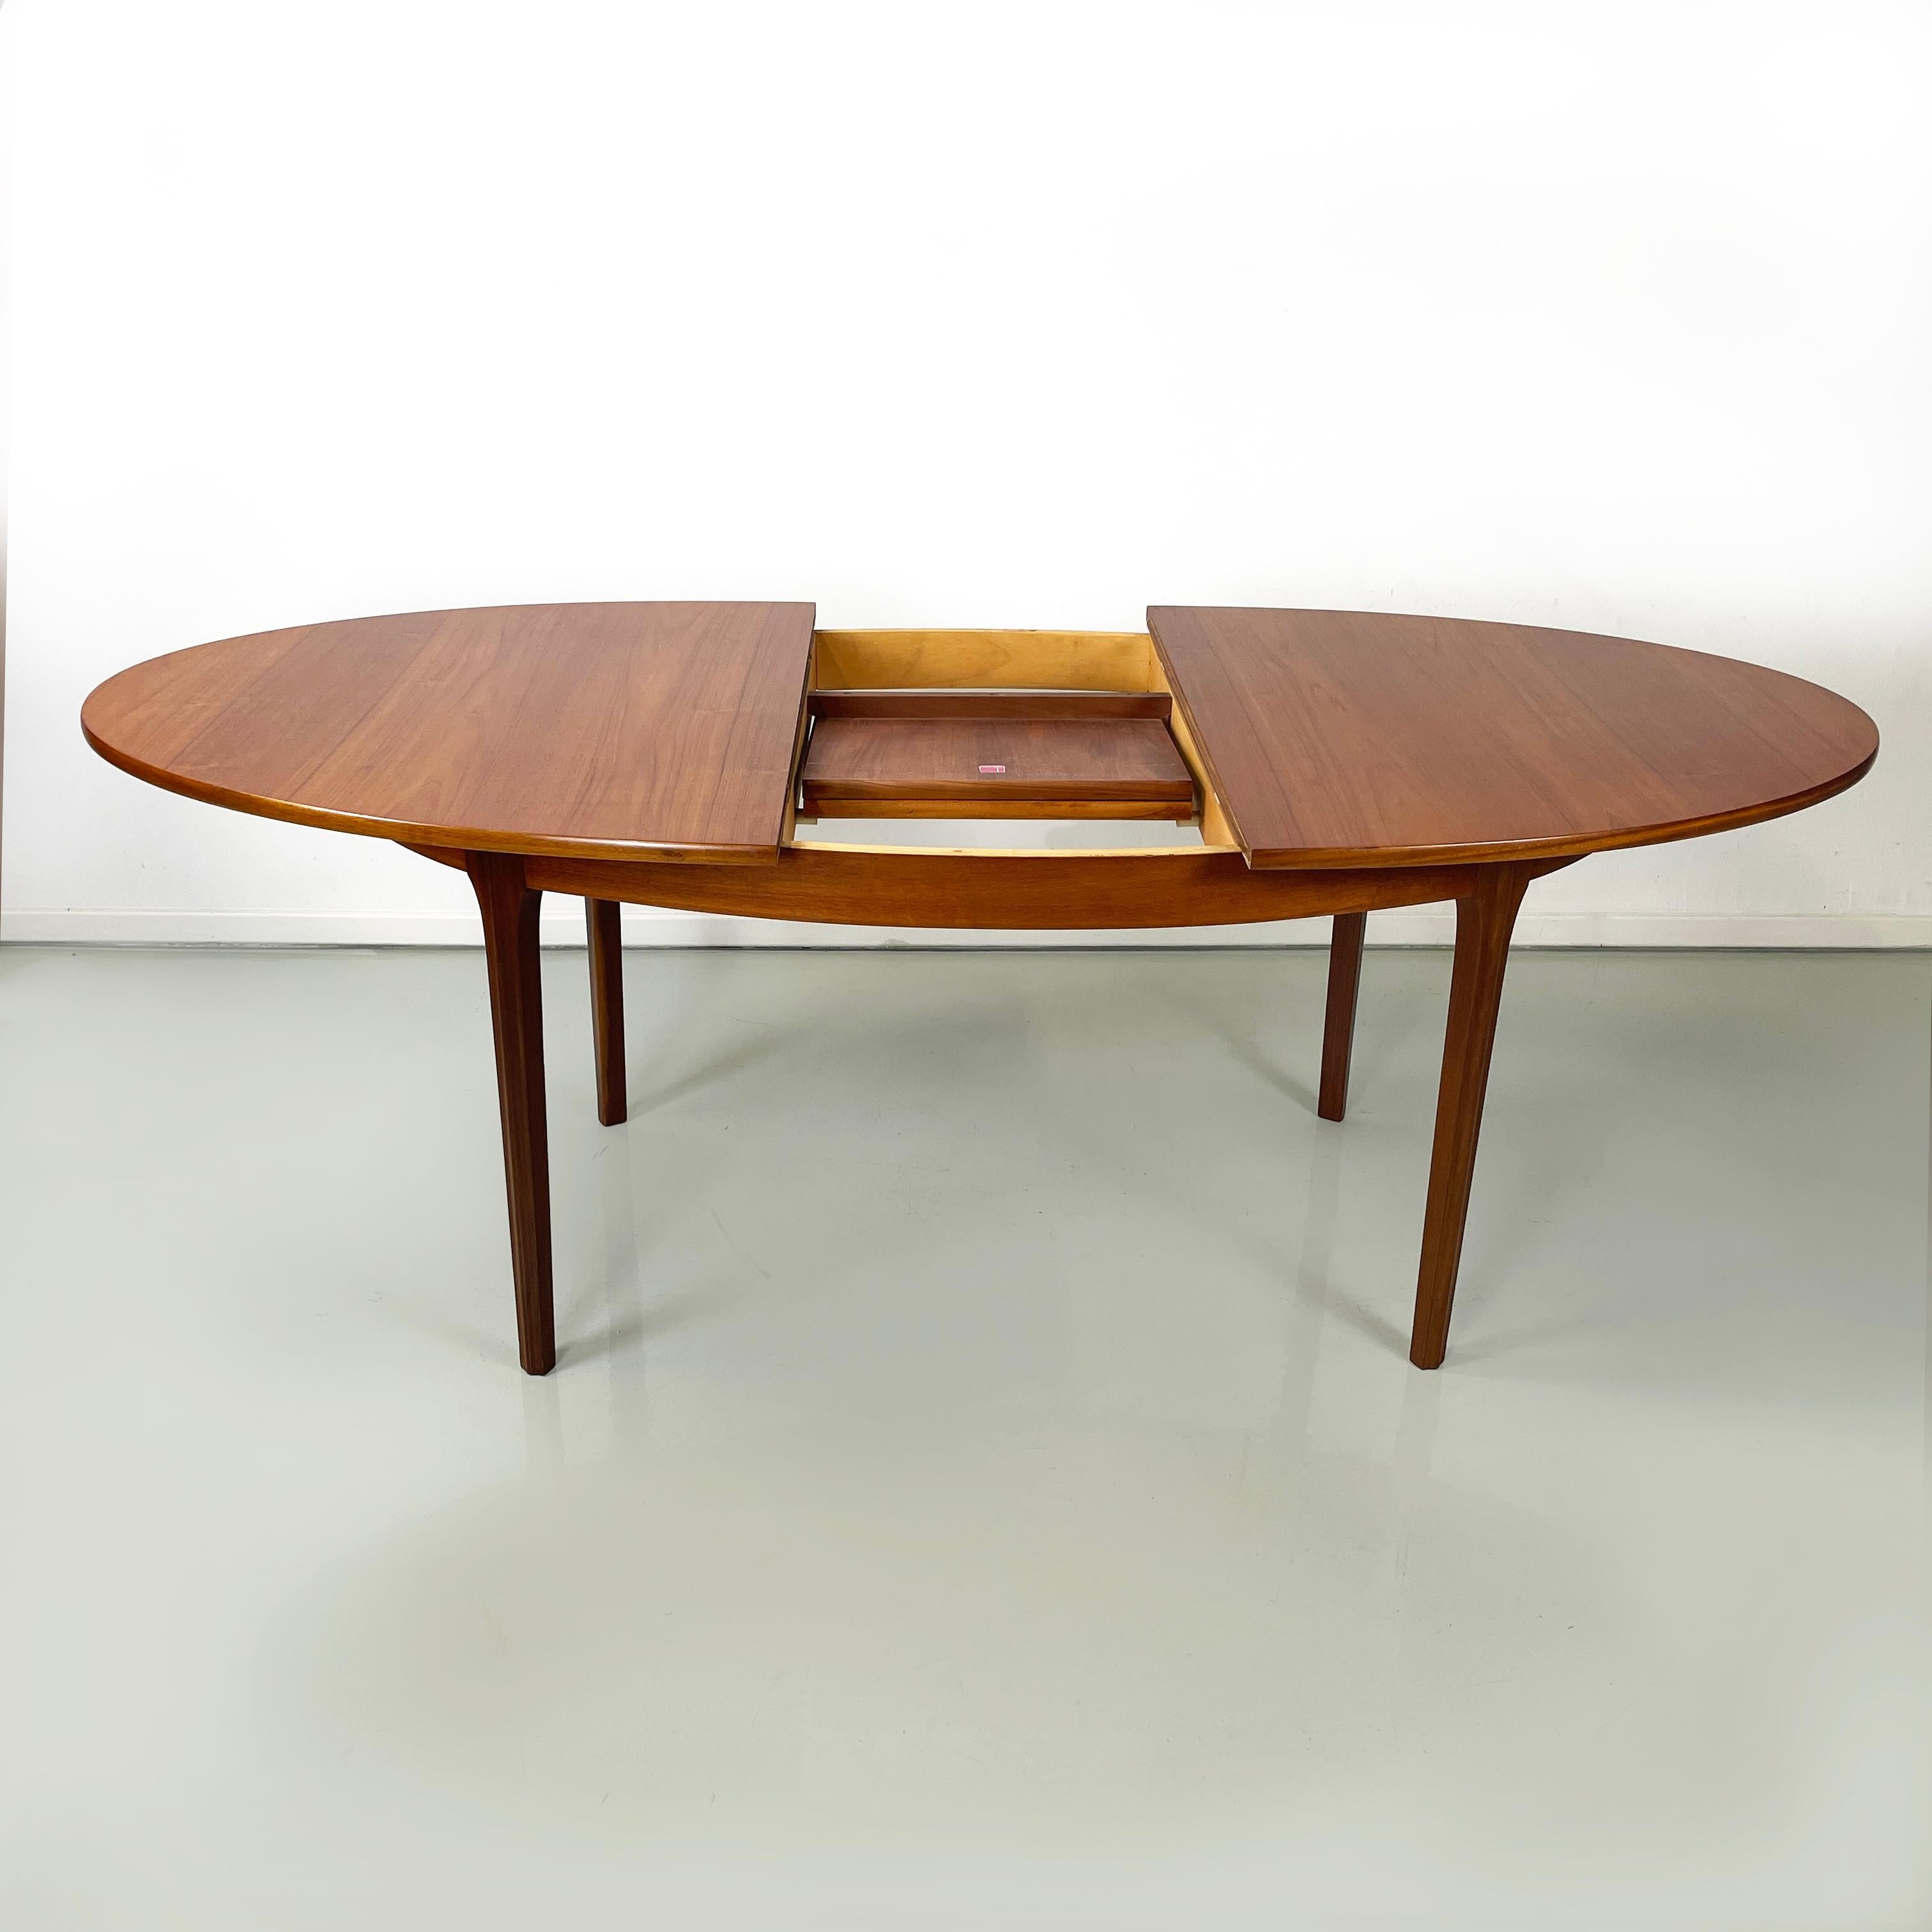 Mid-Century Modern Italian mid-century modern Wooden oval dining table with extensions, 1960s